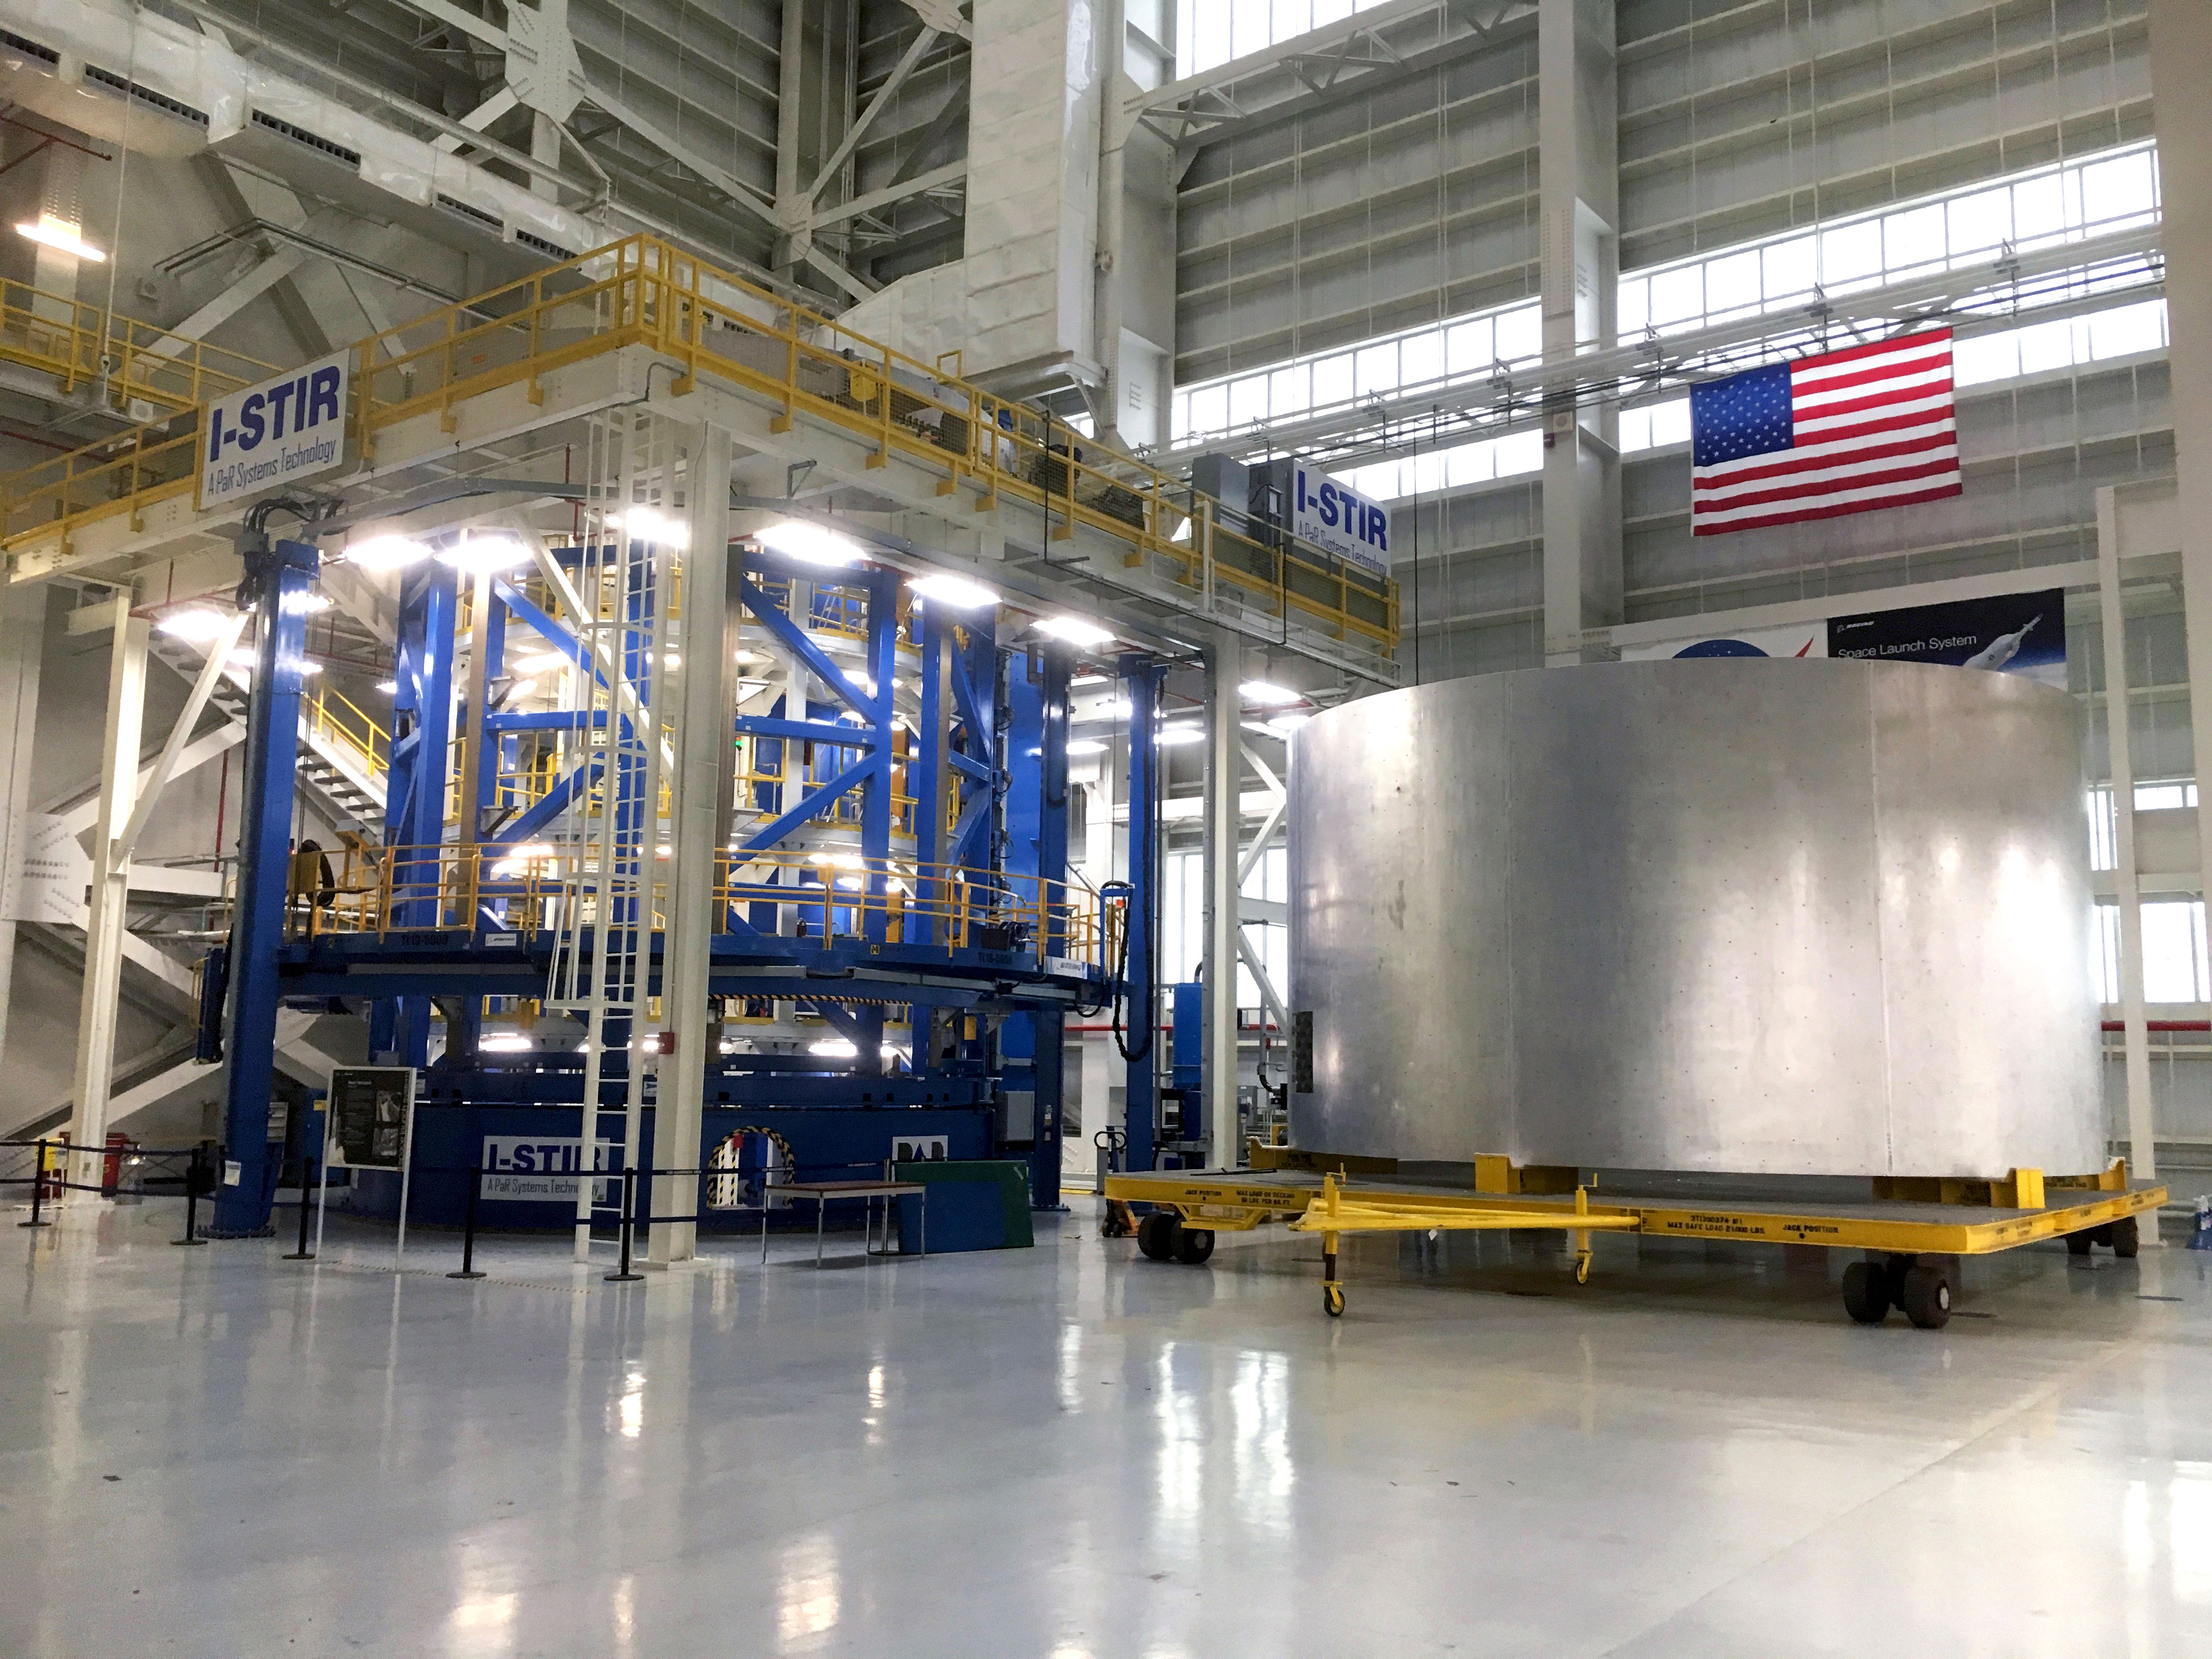 The Vertical Weld Center tool used to fabricate barrel segments for the SLS liquid hydrogen and oxygen core stage tanks via vertical friction stir welding operations at NASA’s Michoud Assembly Facility in New Orleans. To the right of the welder is the weld confidence barrell. Credit: Chase Clark